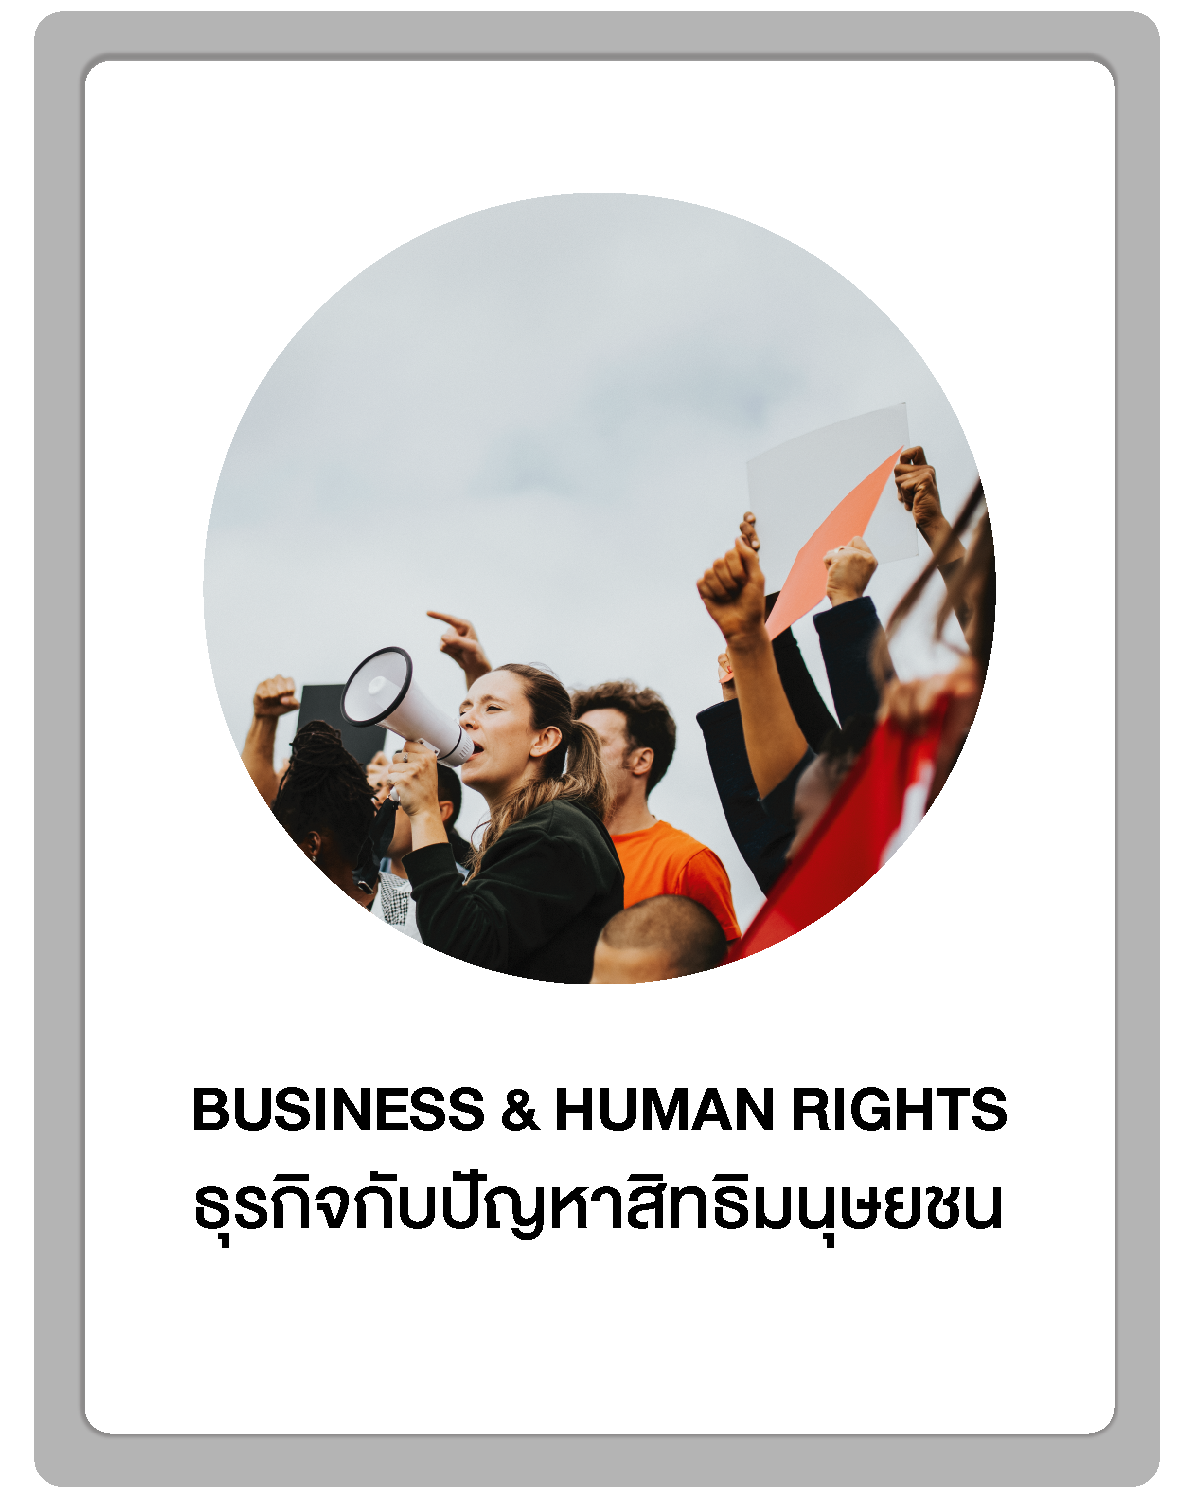 BUSINESS & HUMAN RIGHTS